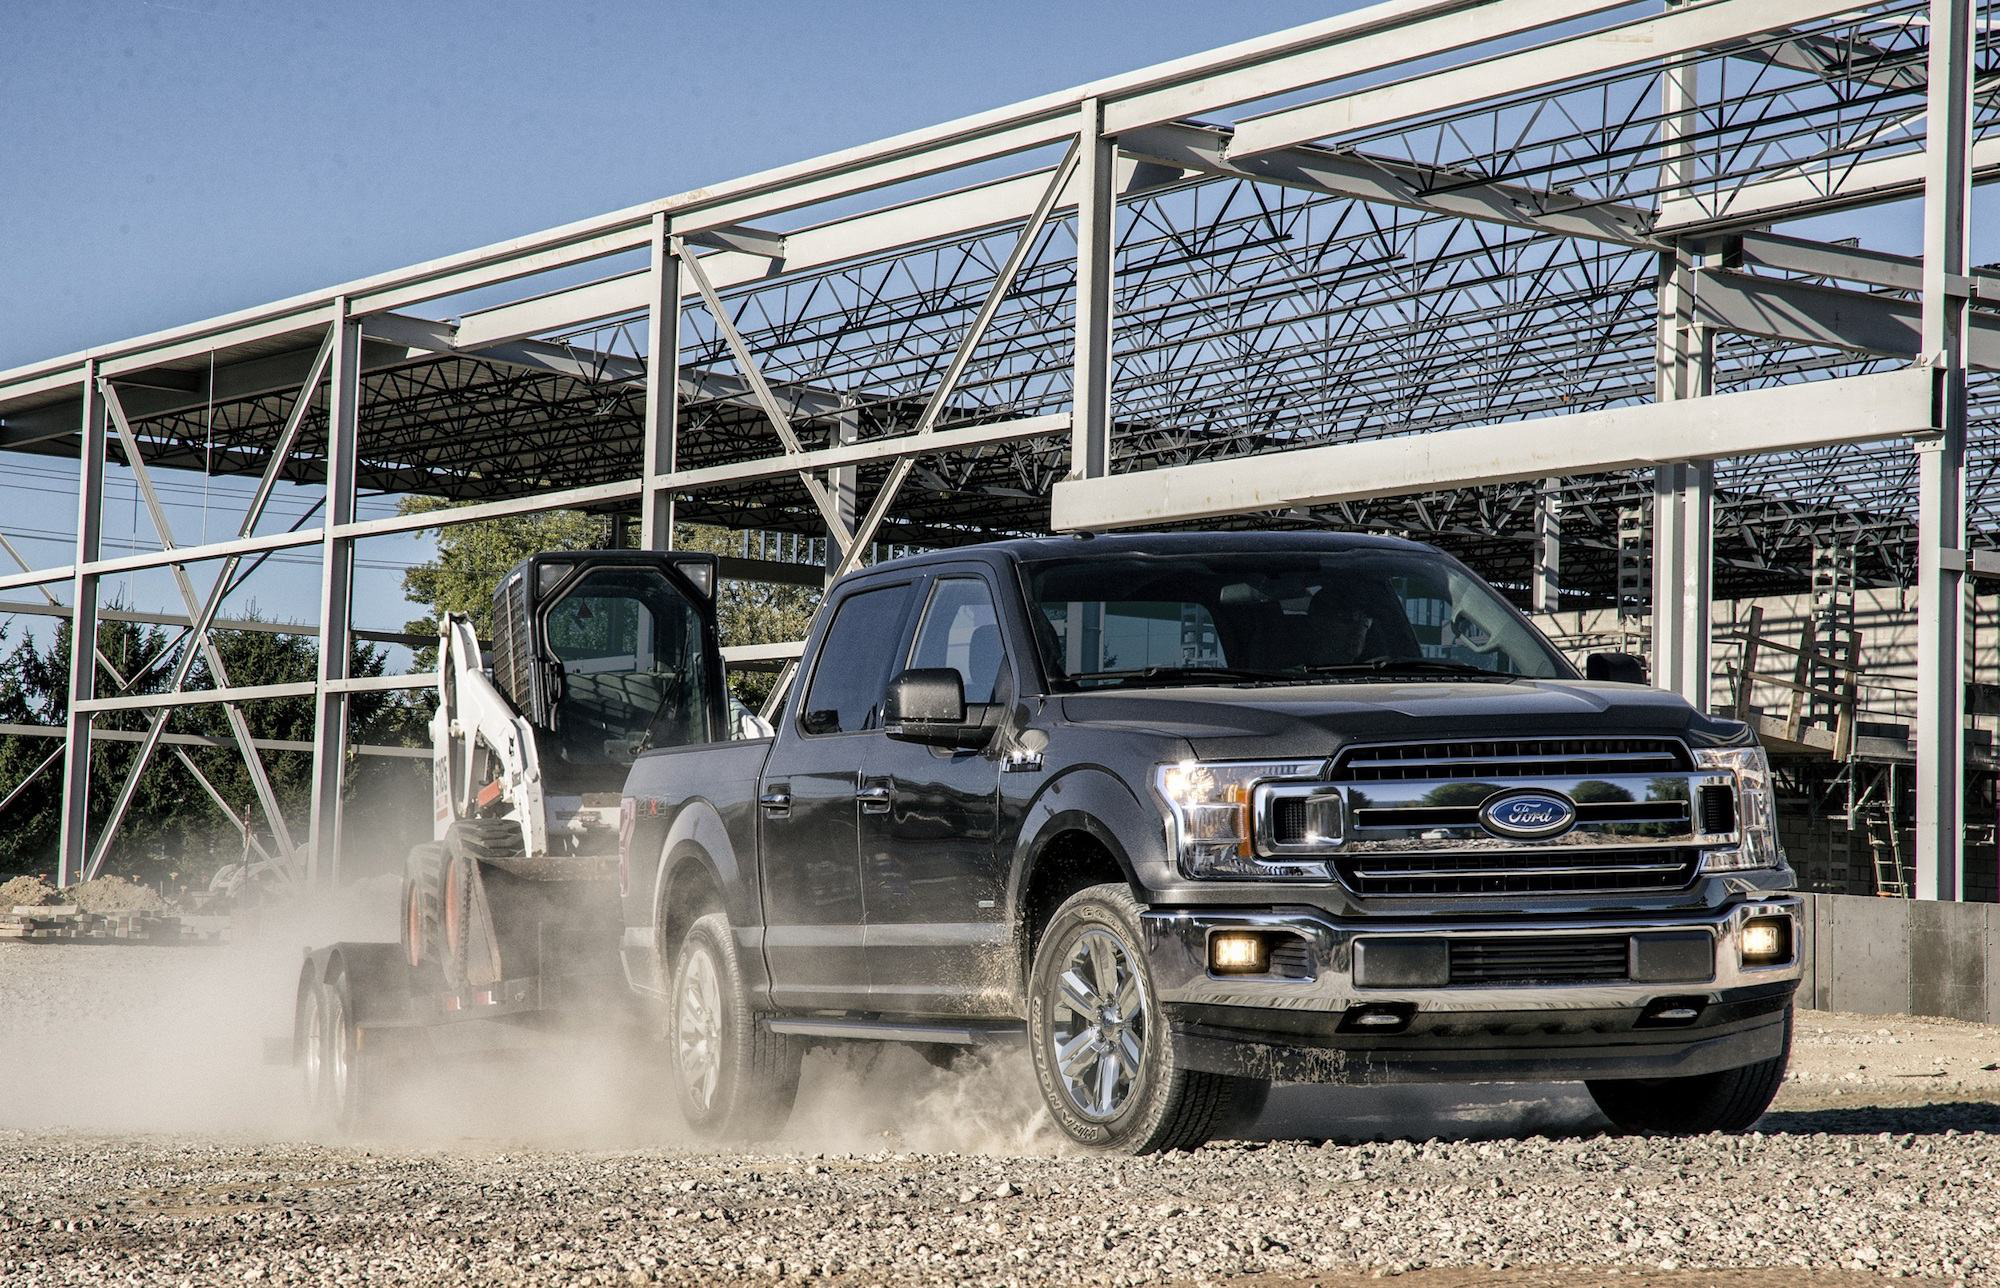 Ford's best F-150 engine lineup yet offers choice of top payload 2018 F 150 2.7 L Towing Capacity